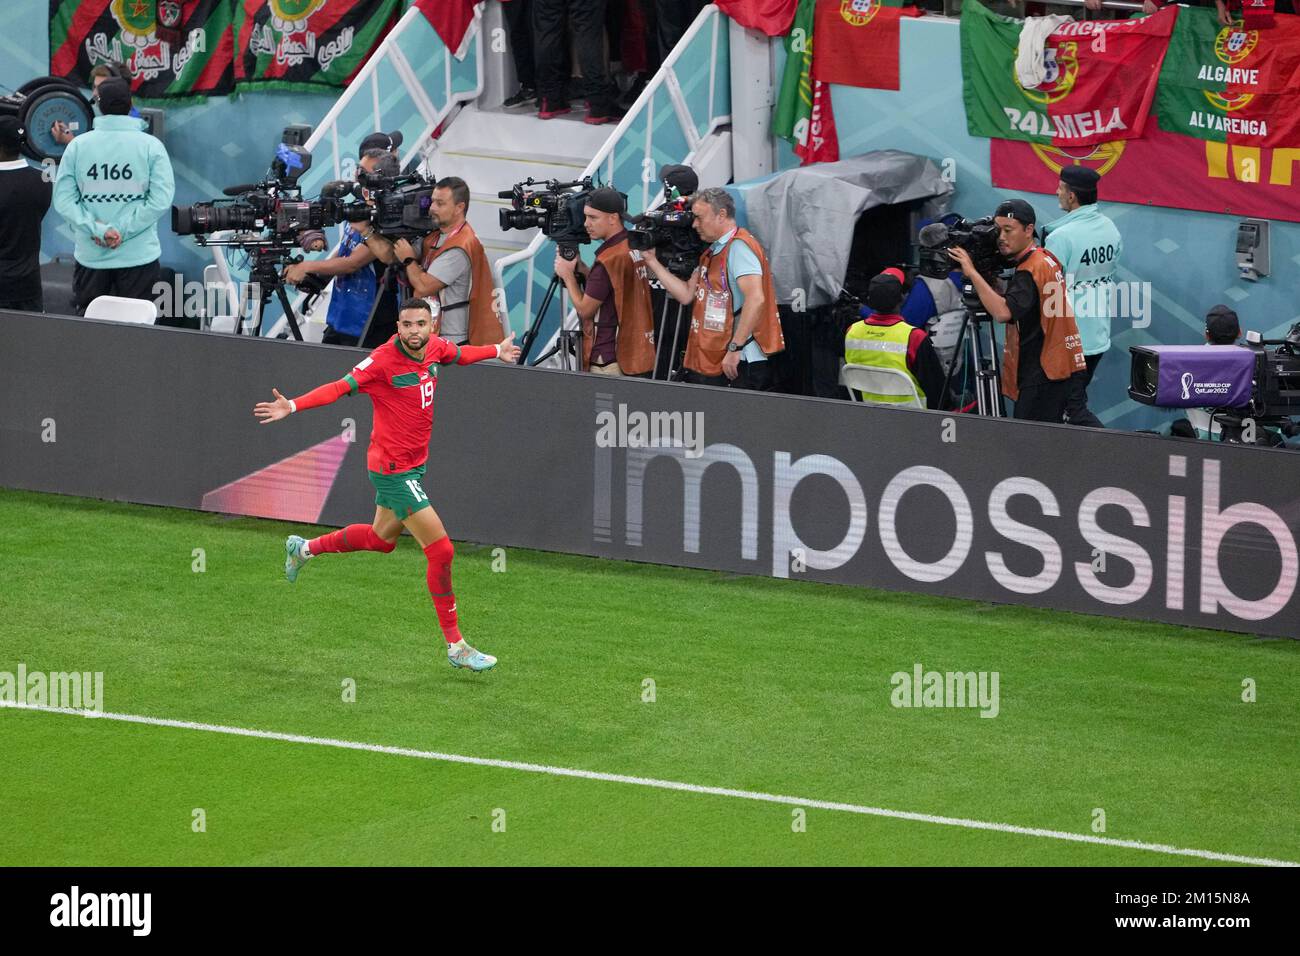 Doha, Qatar. 10th Dec, 2022. Youssef En-Nesyri of Morocco celebrates scoring during the Quarterfinal between Morocco and Portugal of the 2022 FIFA World Cup at Al Thumama Stadium in Doha, Qatar, Dec. 10, 2022. Credit: Zheng Huansong/Xinhua/Alamy Live News Stock Photo